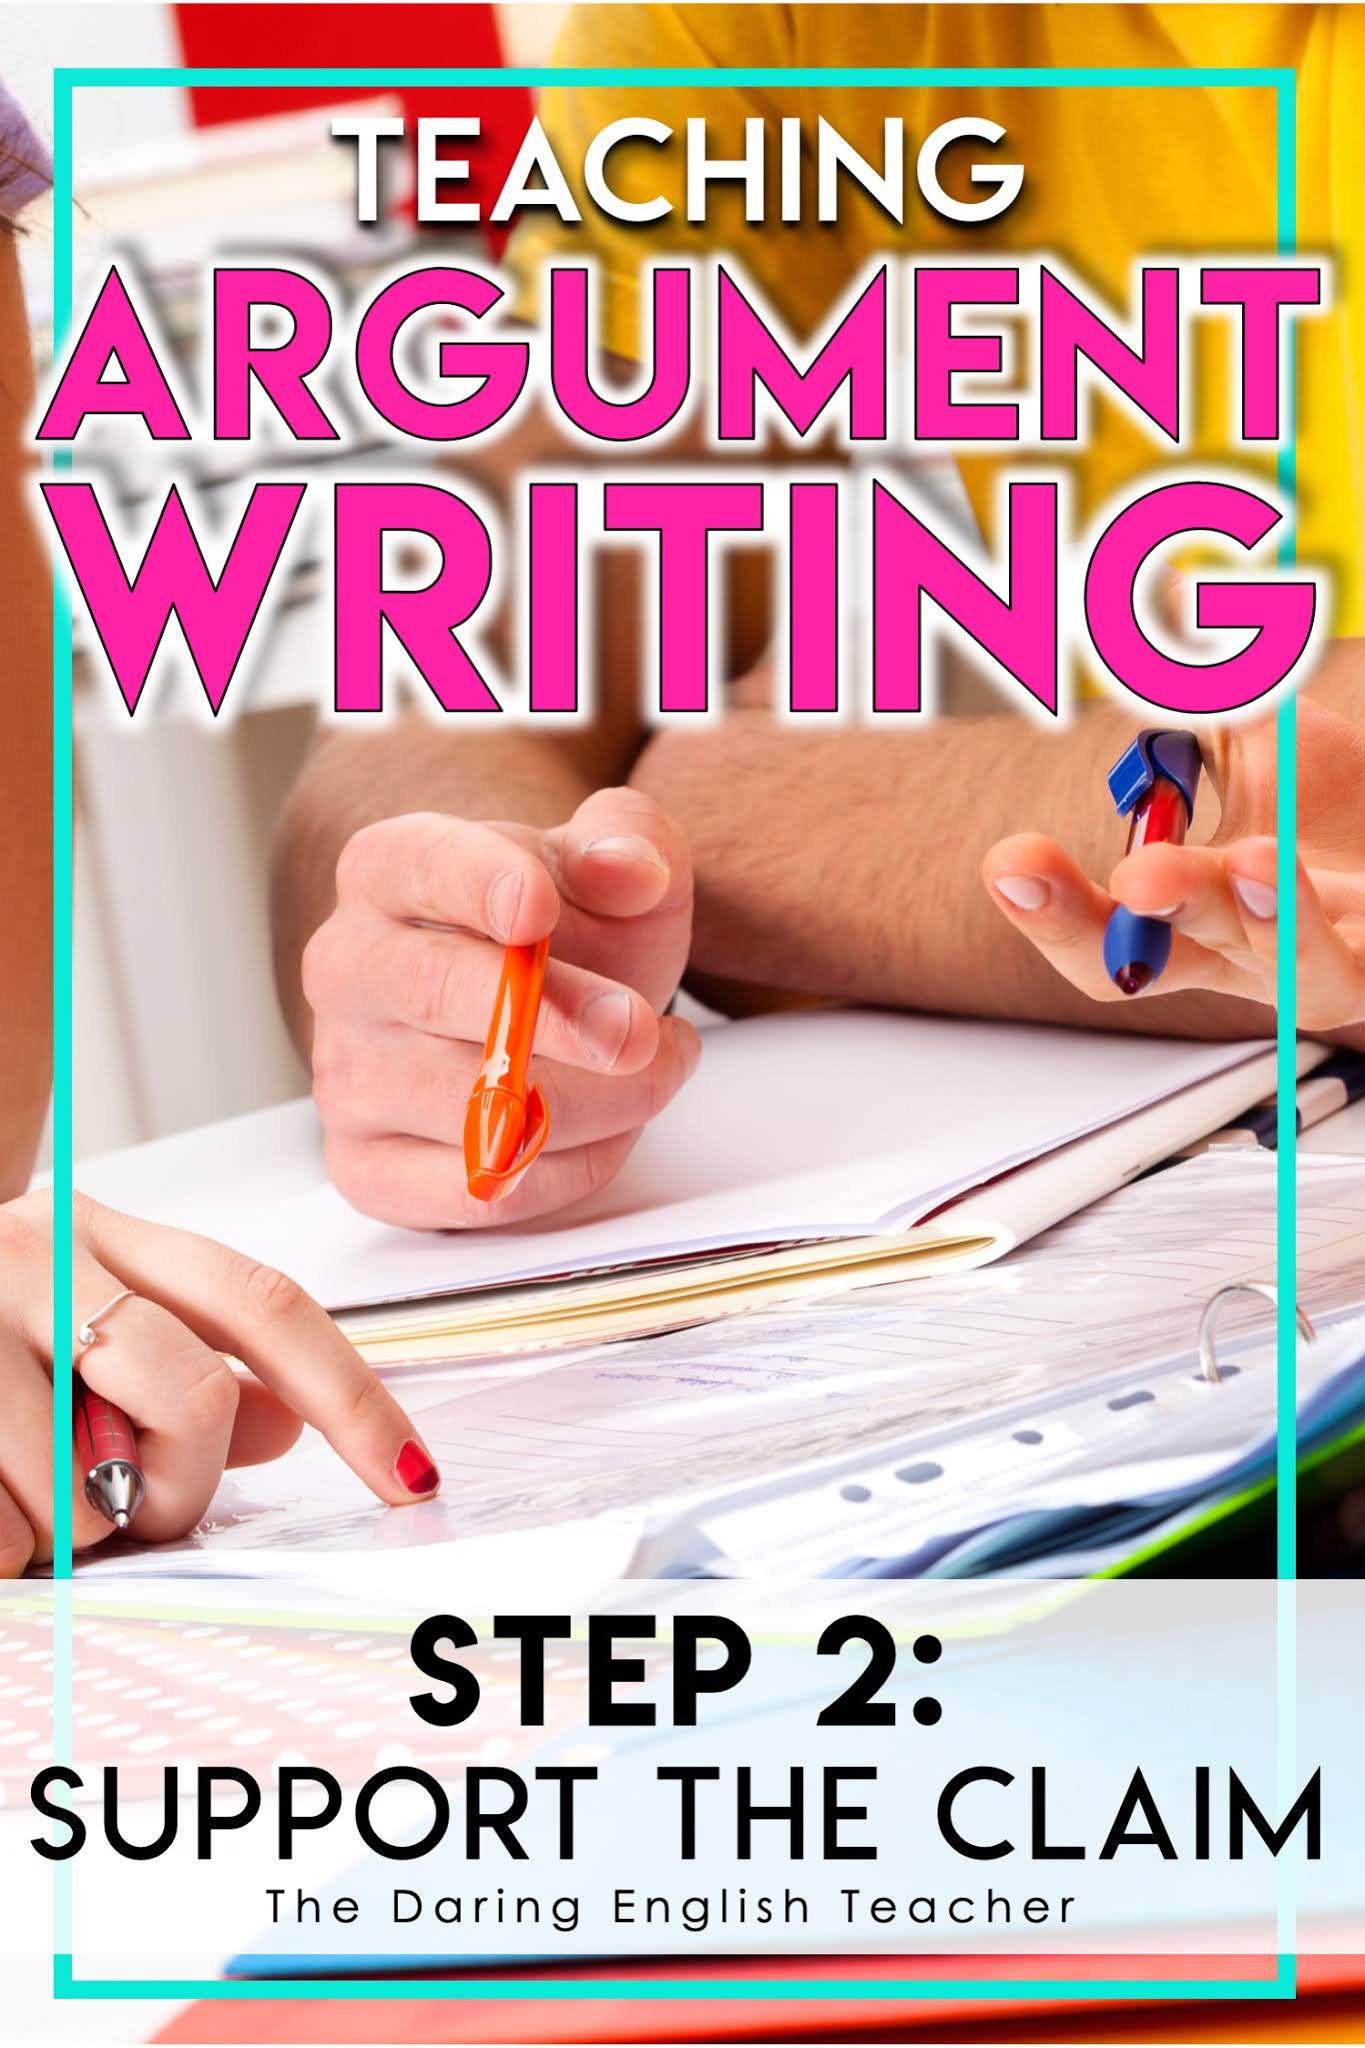 Teaching Argument Writing: Three Steps to Improve Instruction